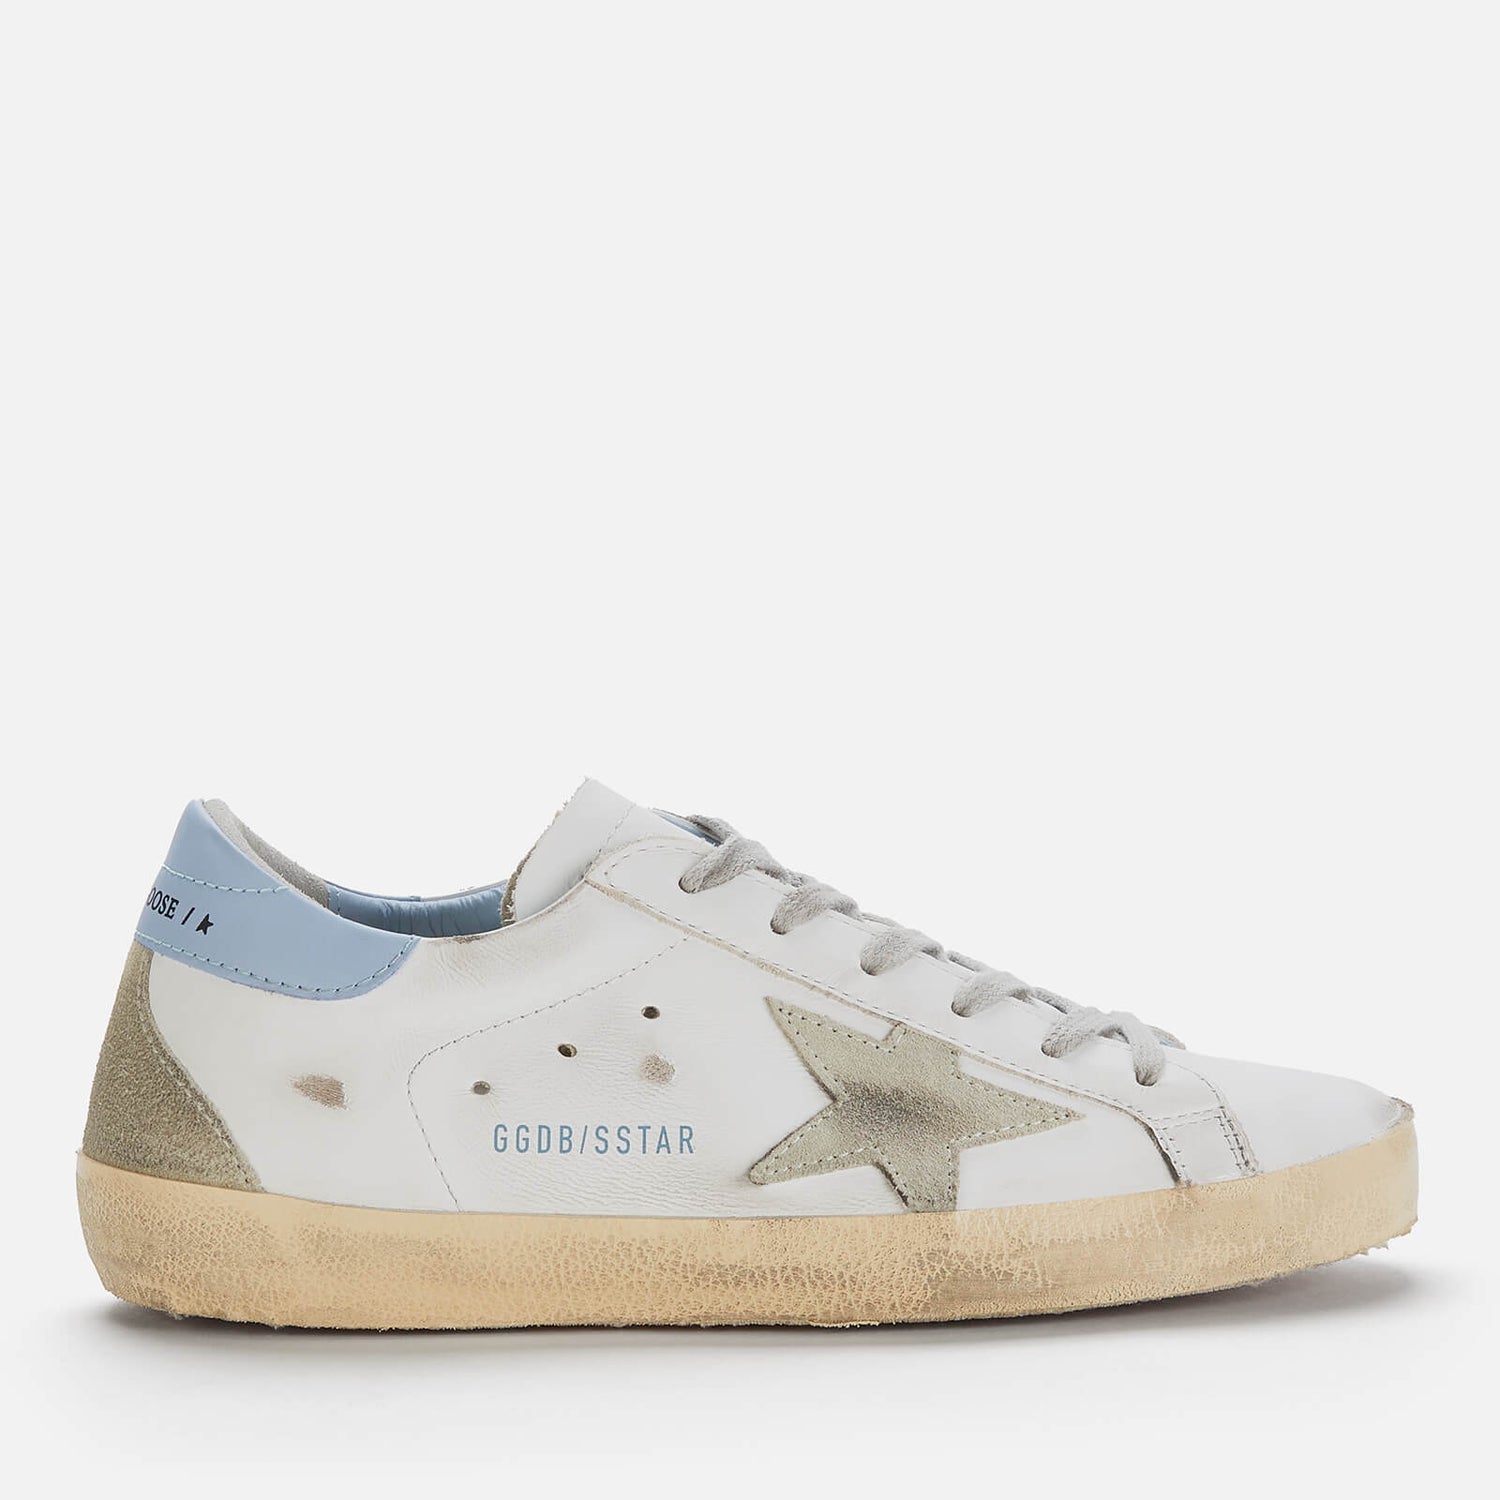 Golden Goose Women's Superstar Leather Trainers - White/Ice/Powder Blue - UK 8